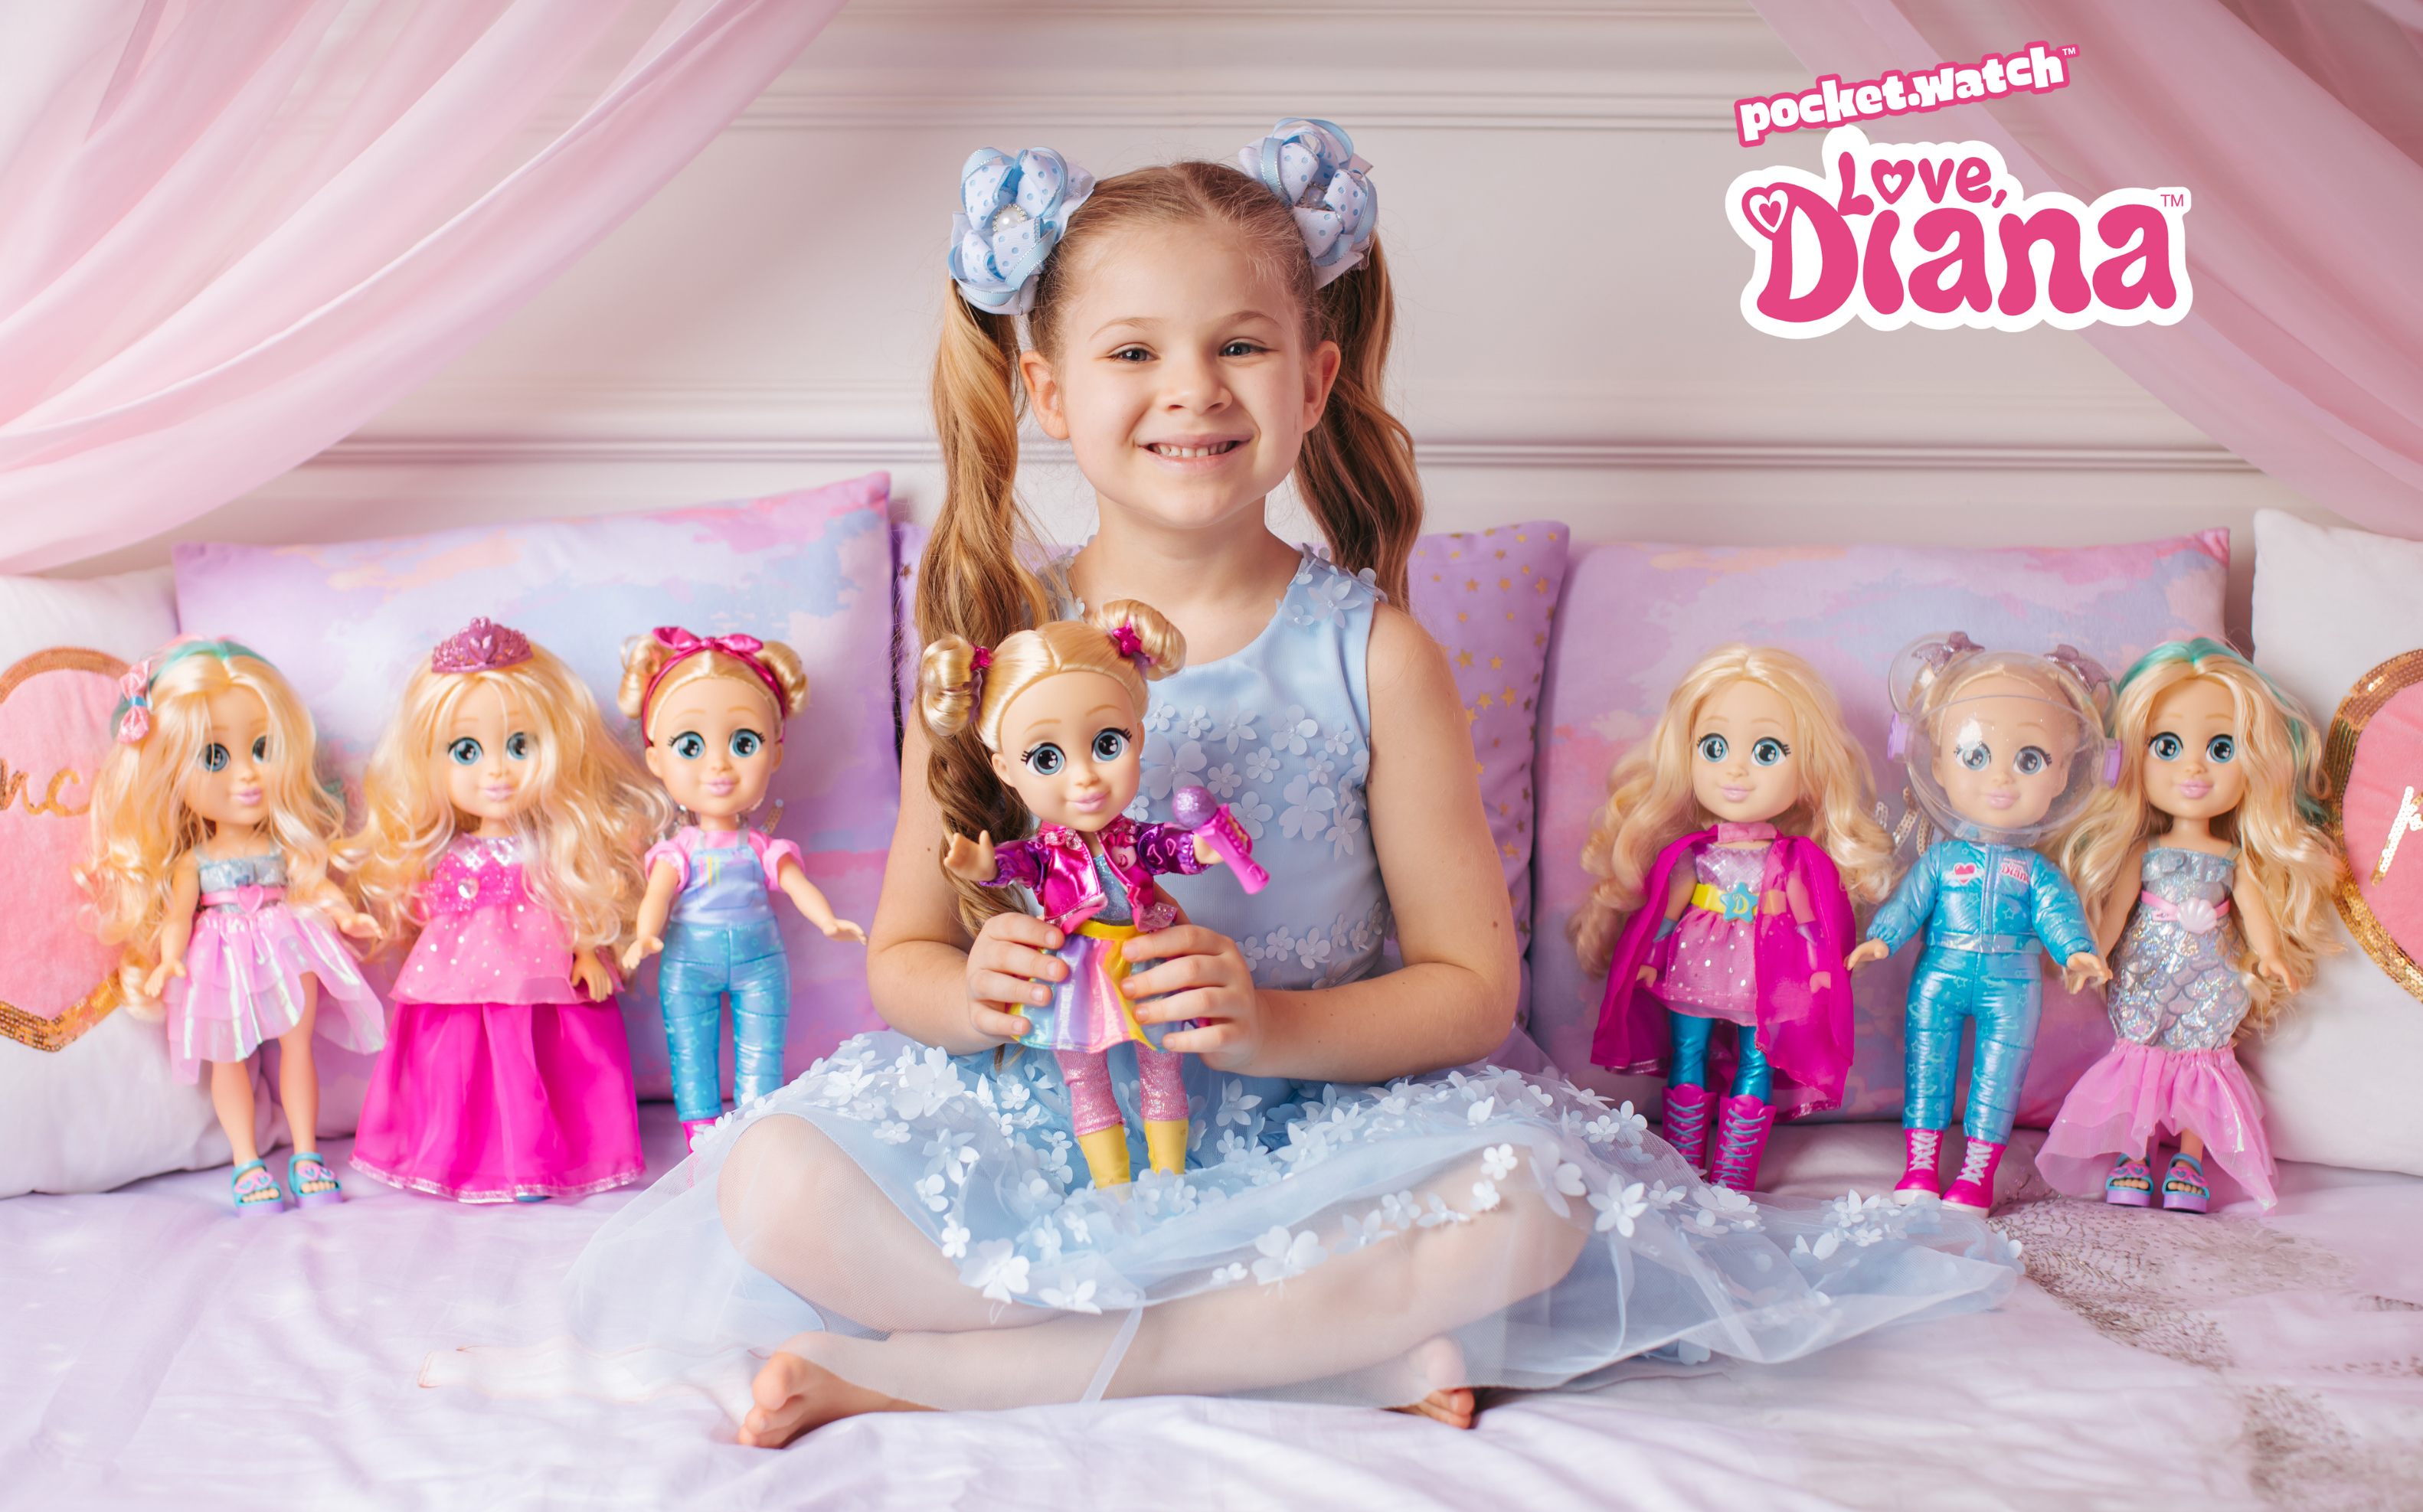 Our Love Diana dolls are here! Shop the range at Kmart, Big W, Target and other leading toy retailers.